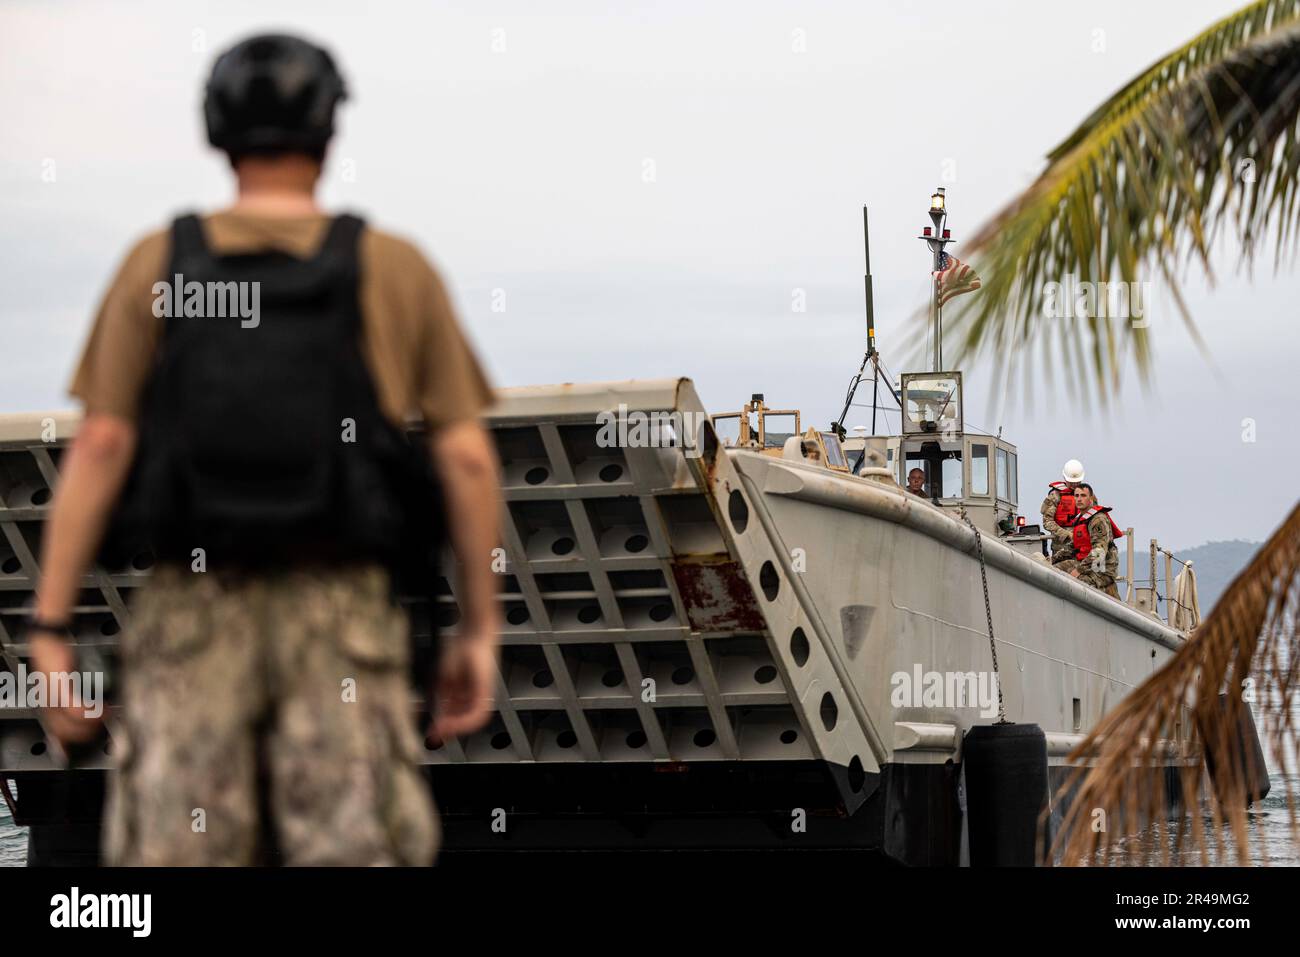 A U.S. Navy Sailor watches as an Army Landing Craft Mechanized drops its ramp during an offload in preparation for Balikatan 23 at Camp Agnew, Casiguran, Philippines, April 8, 2023. Balikatan is an annual exercise between the Armed Forces of the Philippines and U.S. military designed to strengthen bilateral interoperability, capabilities, trust, and cooperation built over decades shared experiences. Stock Photo